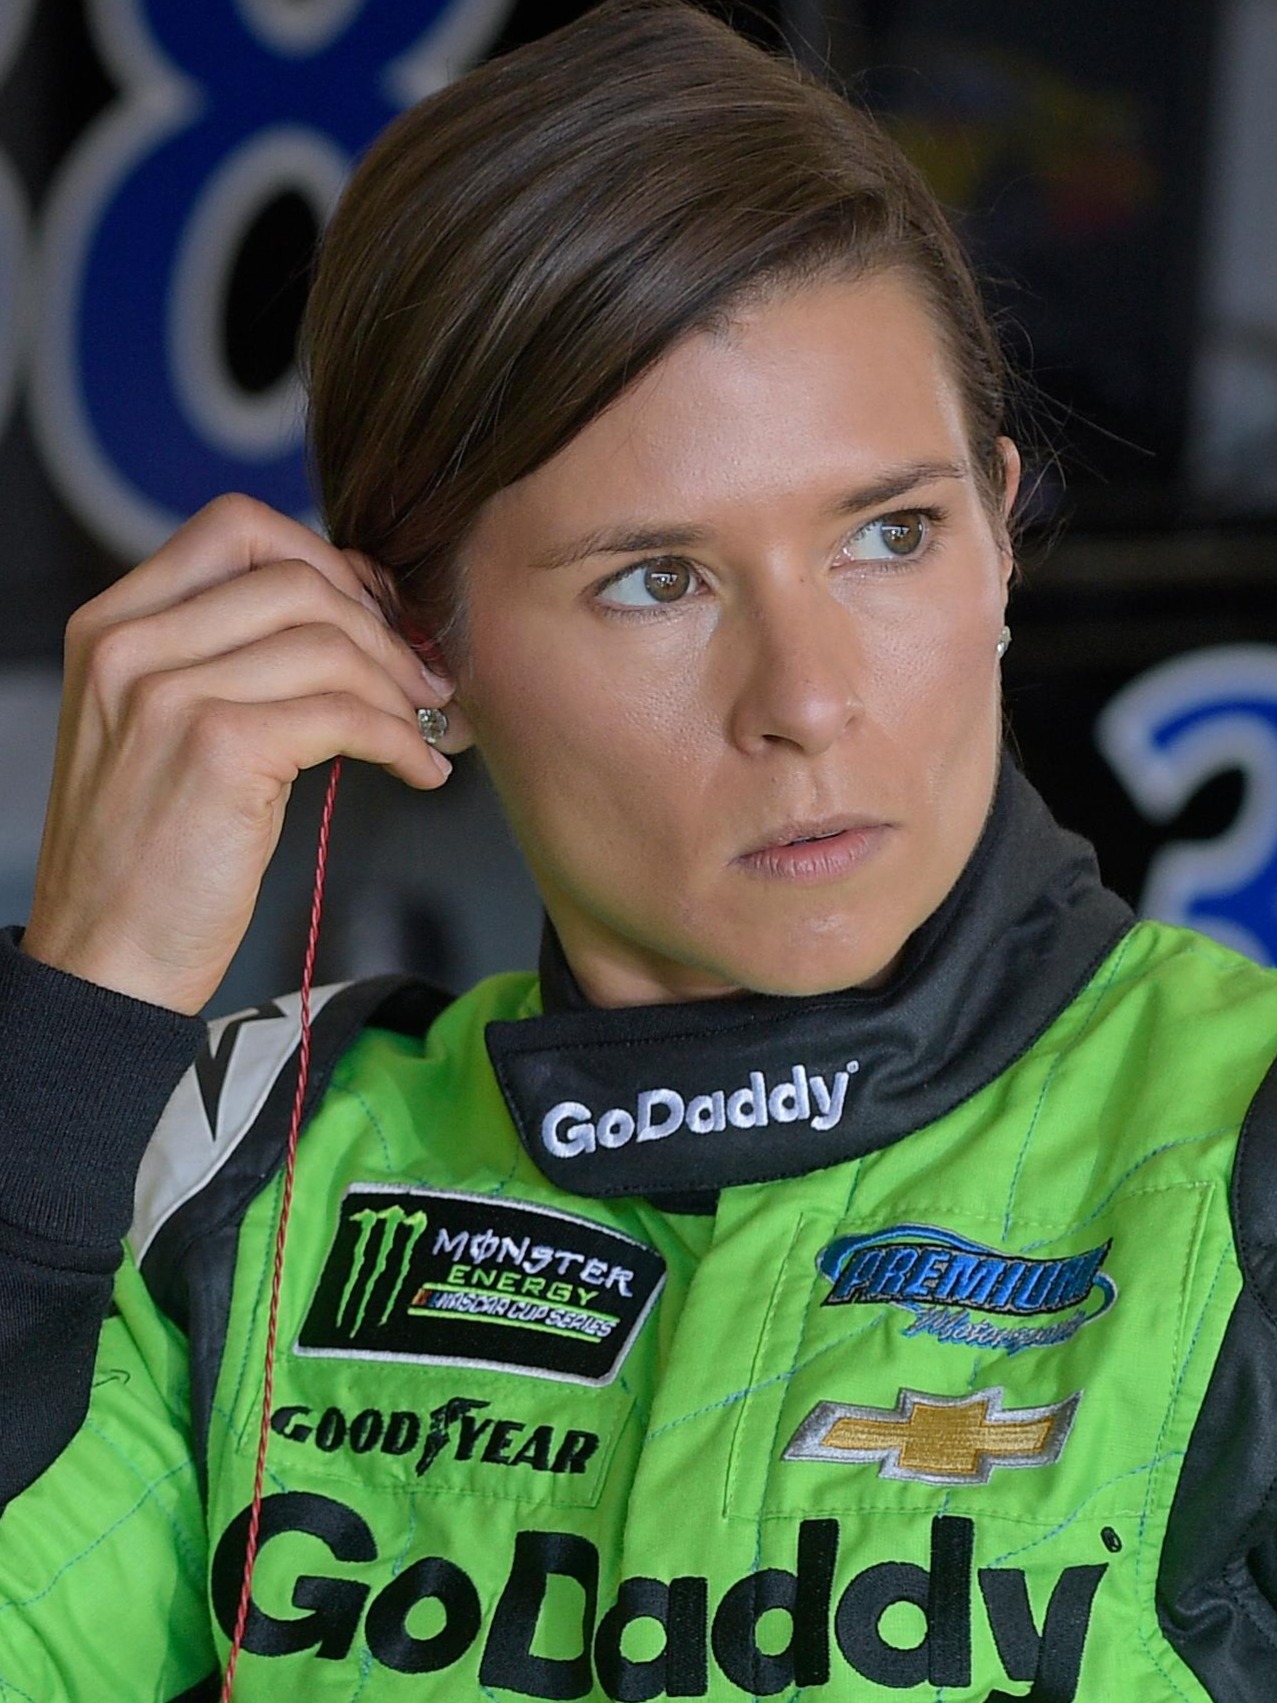 Which team did Danica Patrick drive for in the NASCAR Cup Series?